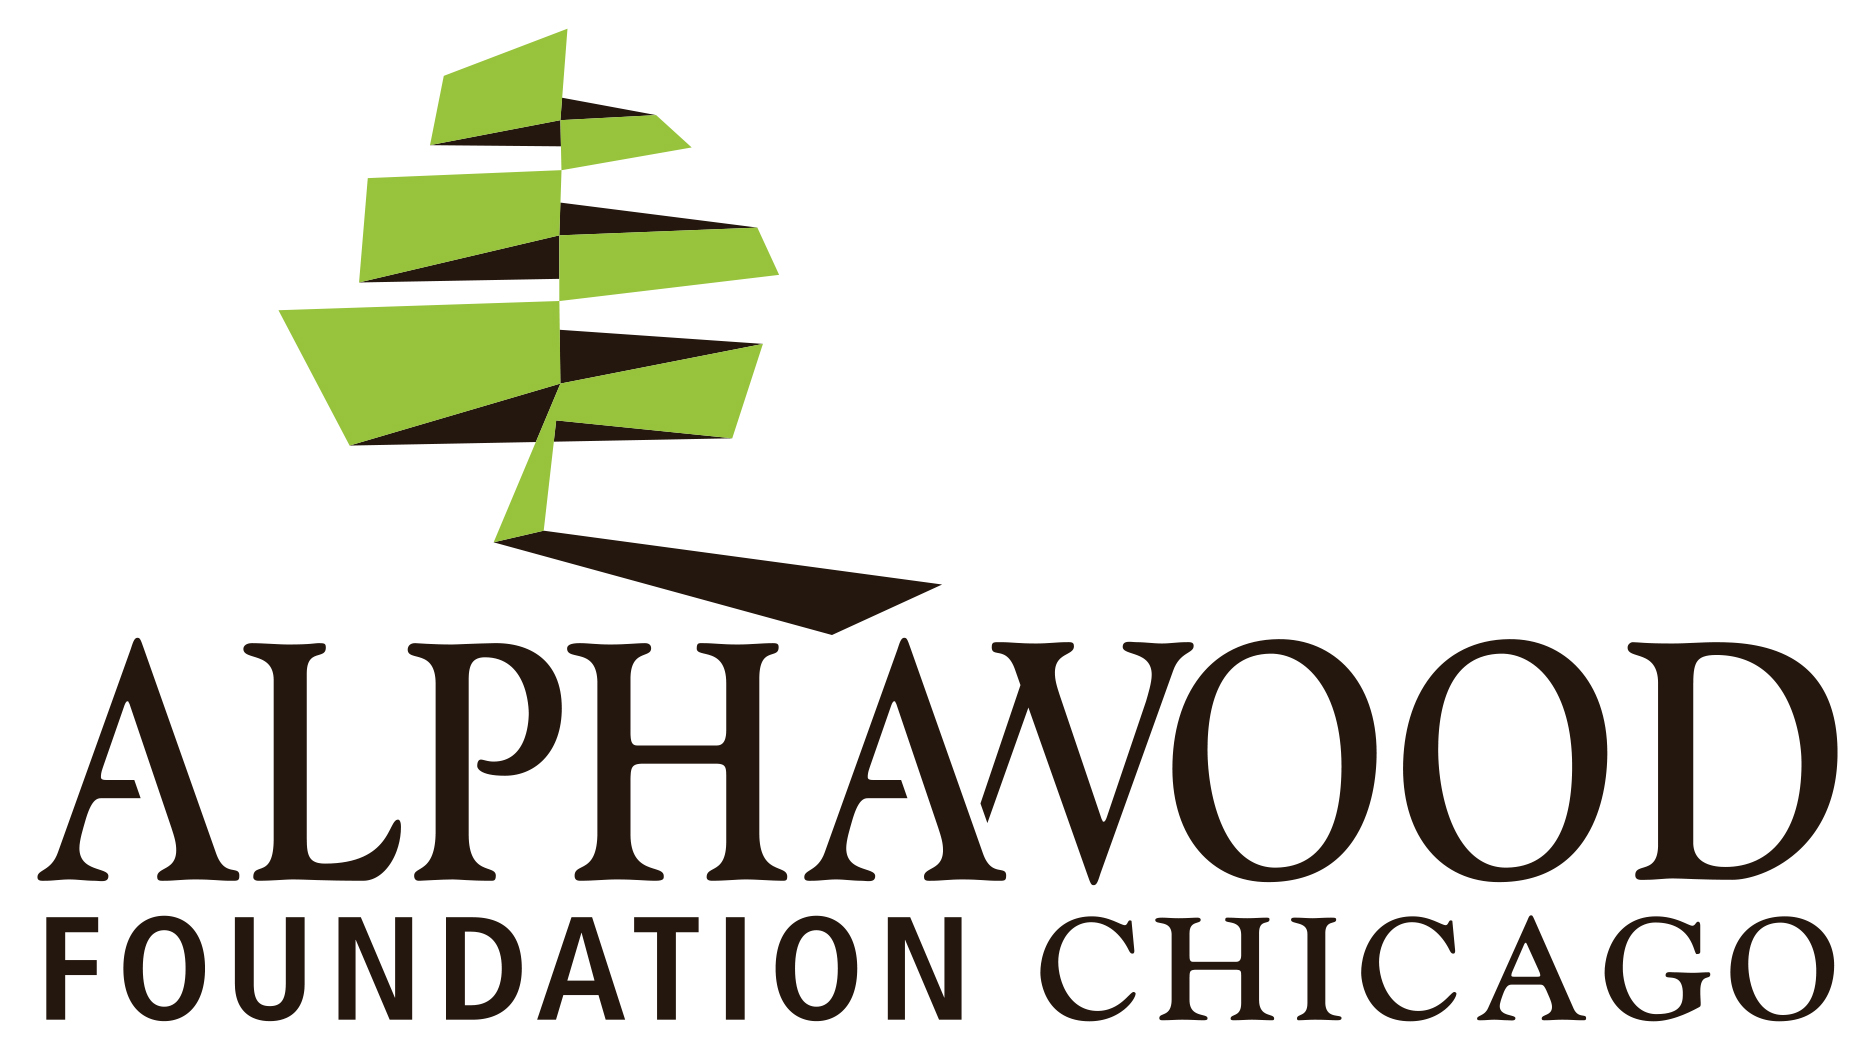 Logo for the Alphawood Foundation Chicago including a tree graphic and the foundation's name